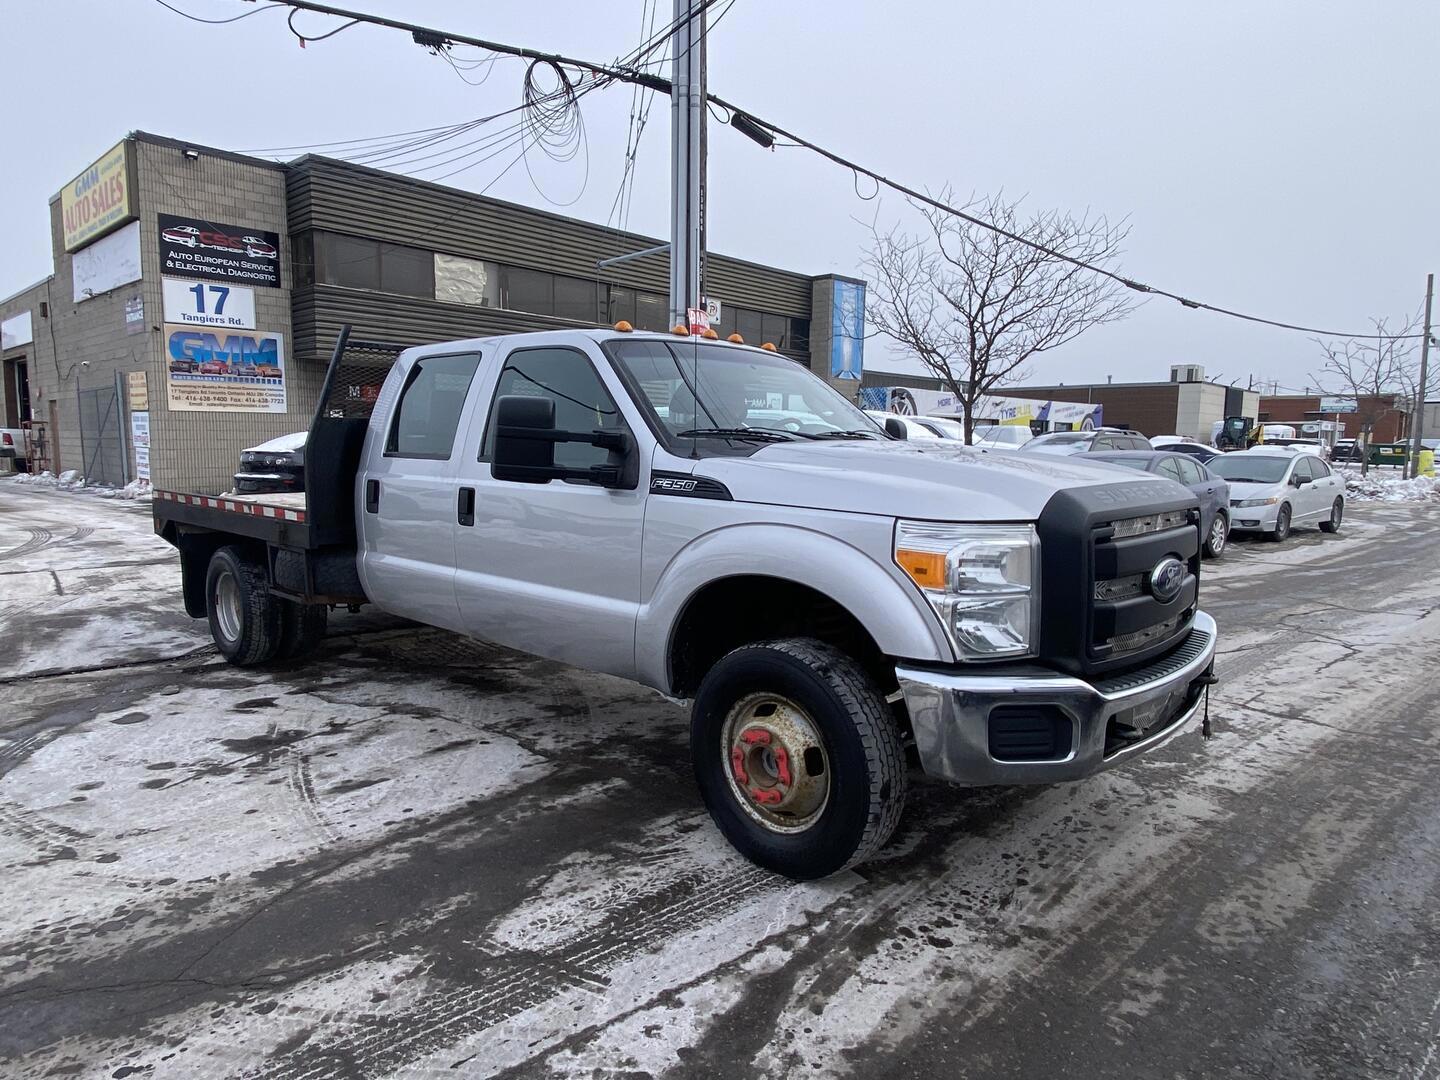 2013 Ford F-350 Dually Crew Cab Flat Bed  4WD